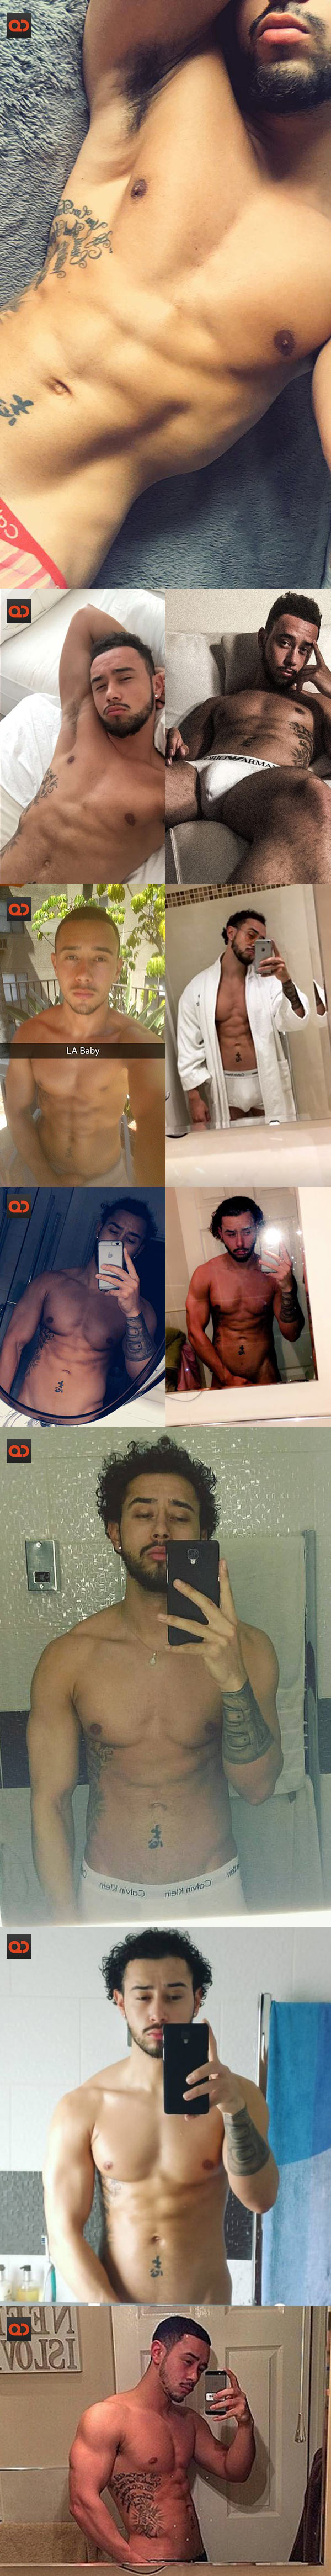 Mason Noise, From X Factor UK, Totally Naked In Leaked Selfies! - Sex Tape Also Hits!